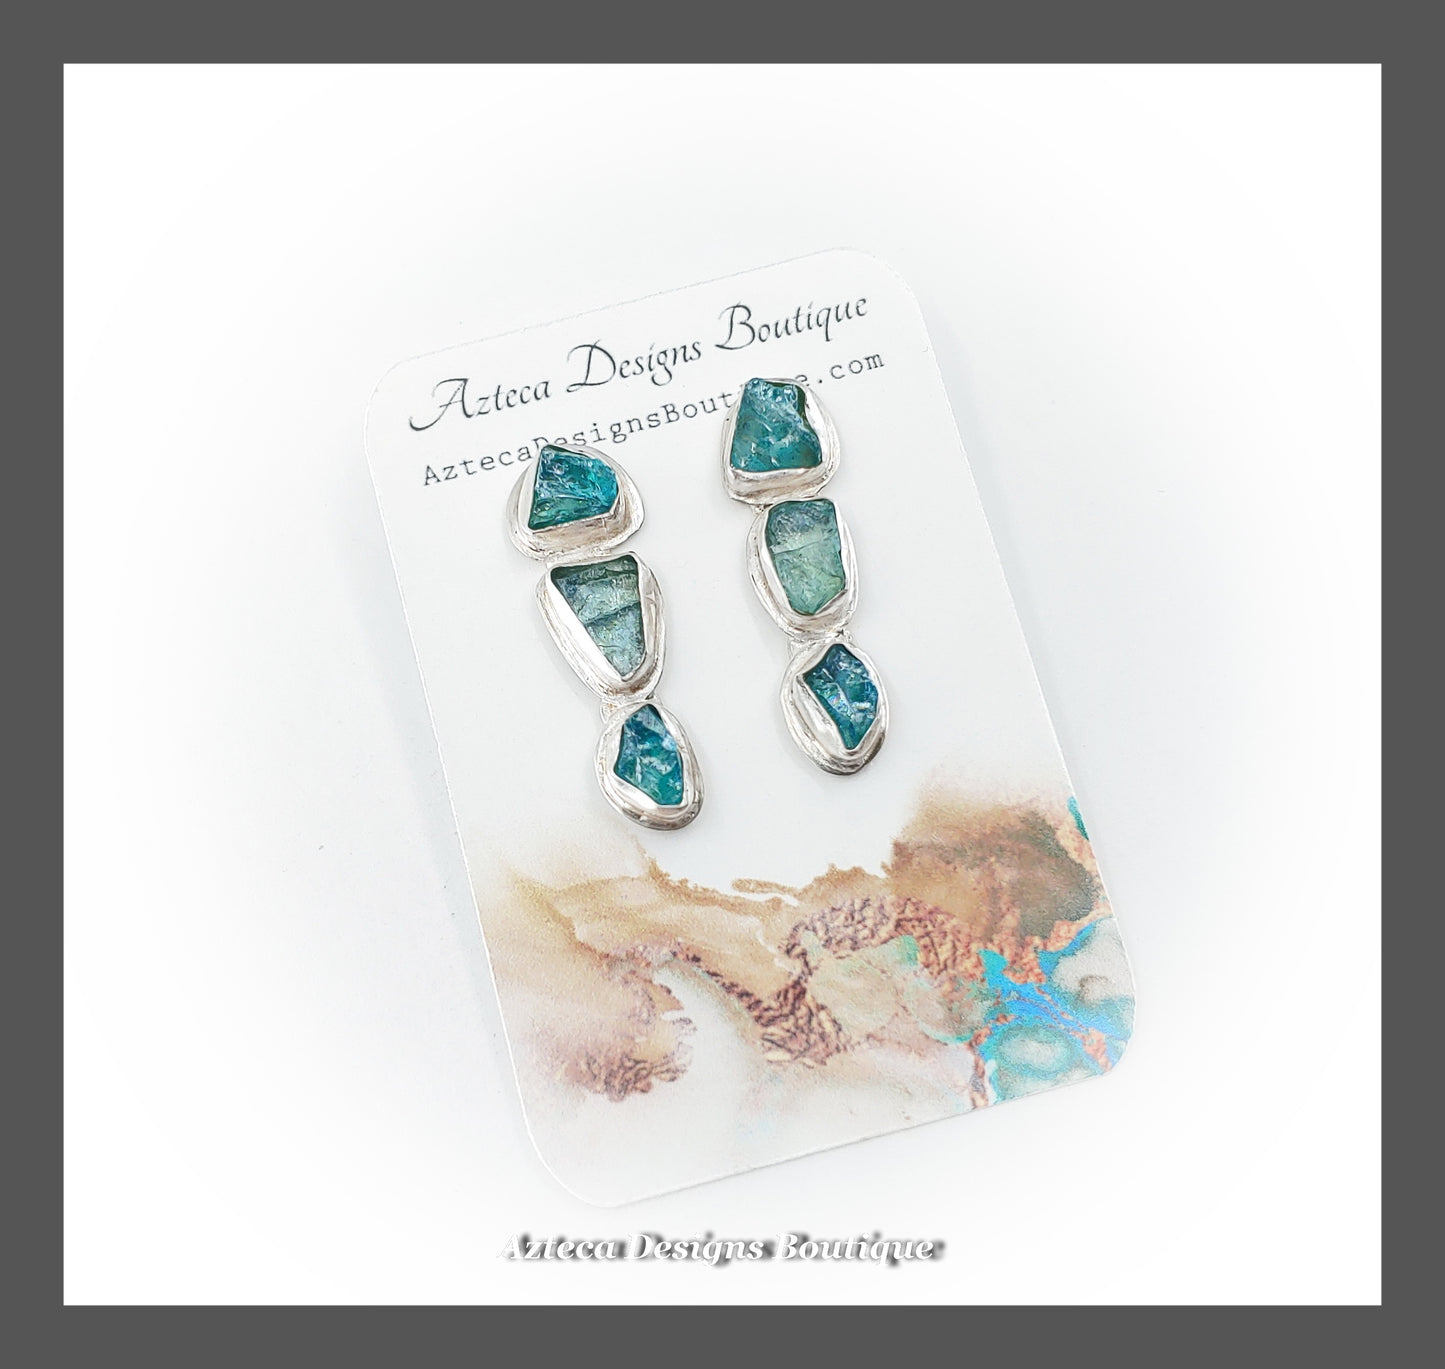 Raw Apatite Triple Crystal + Hand Fabricated Sterling Silver Post Earrings